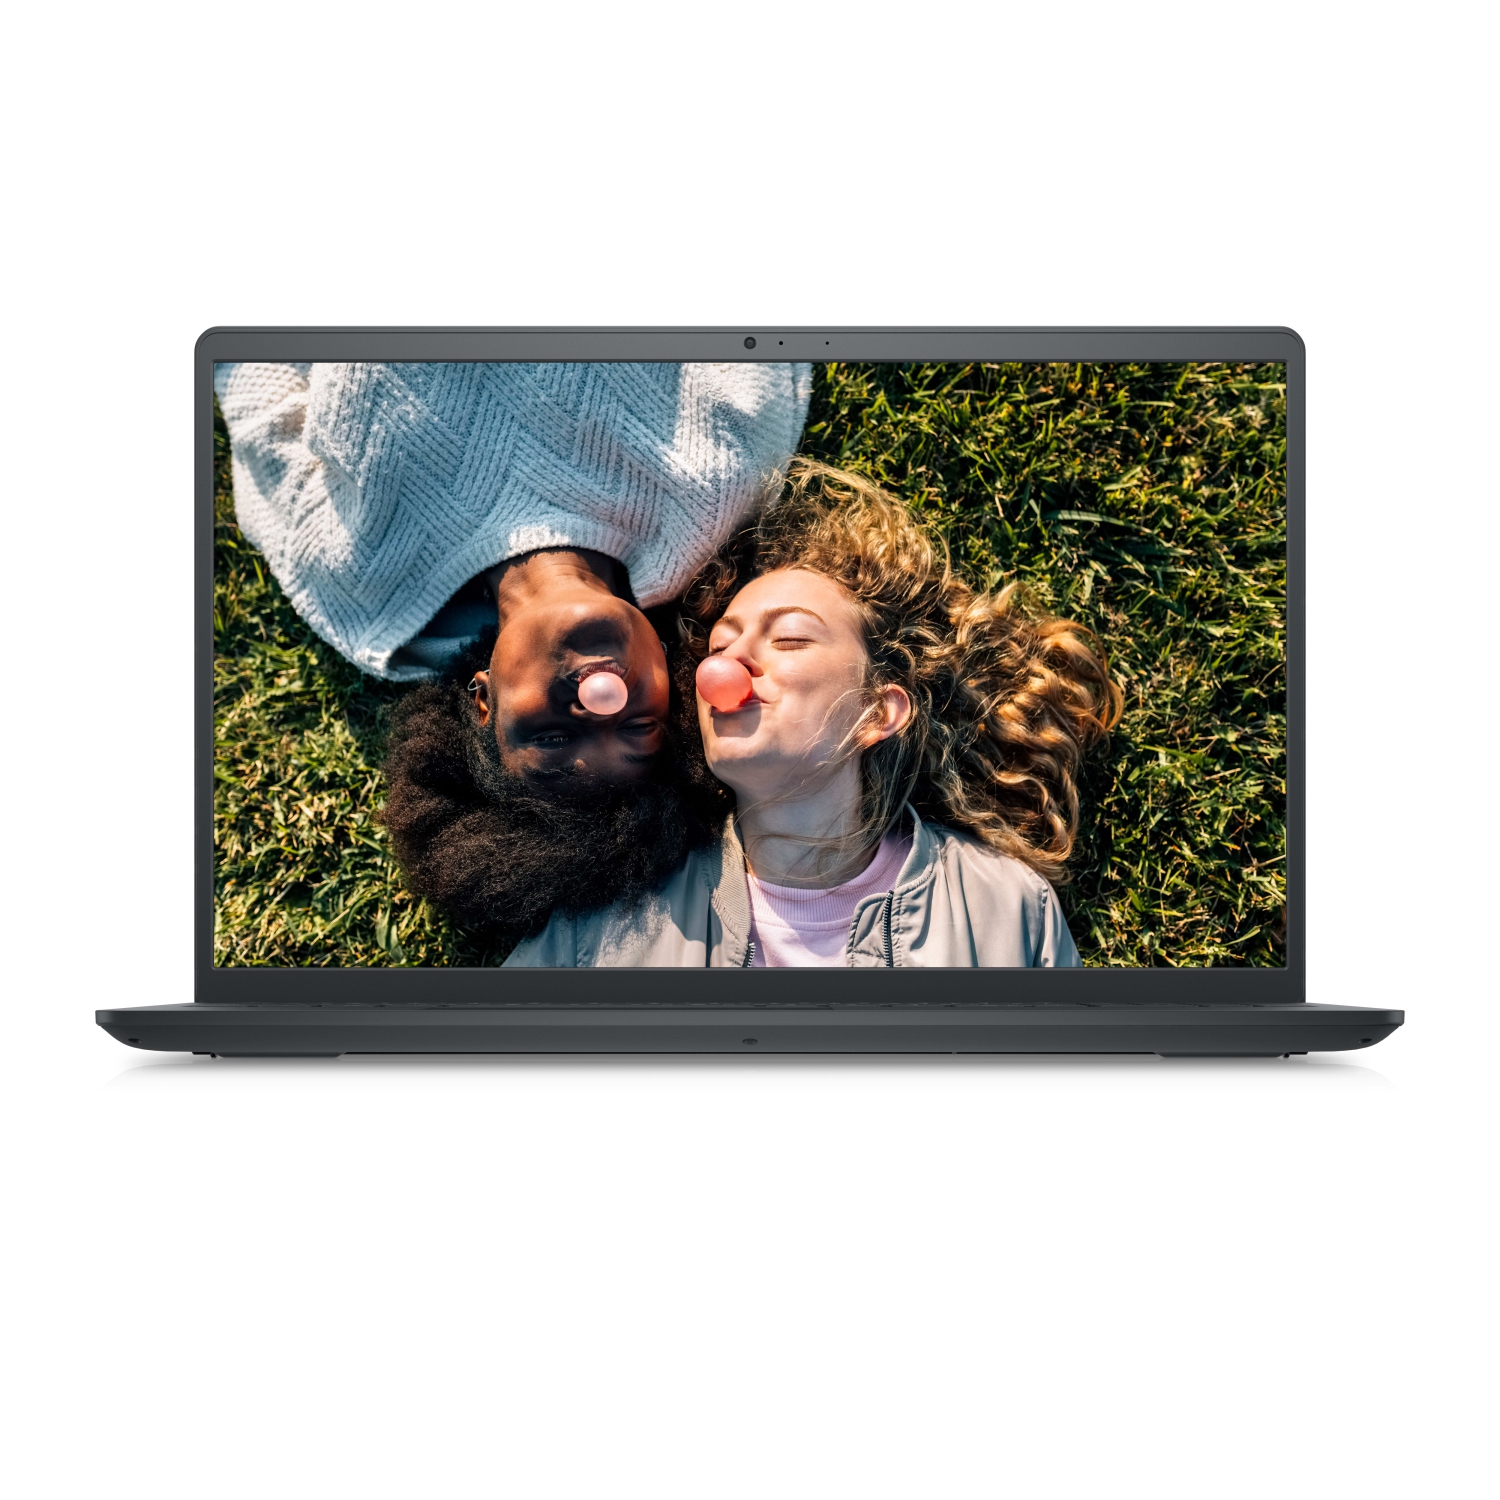 Refurbished (Excellent) – Dell Inspiron 3511 Laptop (2021) | 15.6" FHD Touch | Core i5 - 256GB SSD + 2TB HDD - 32GB RAM | 4 Cores @ 4.2 GHz - 11th Gen CPU